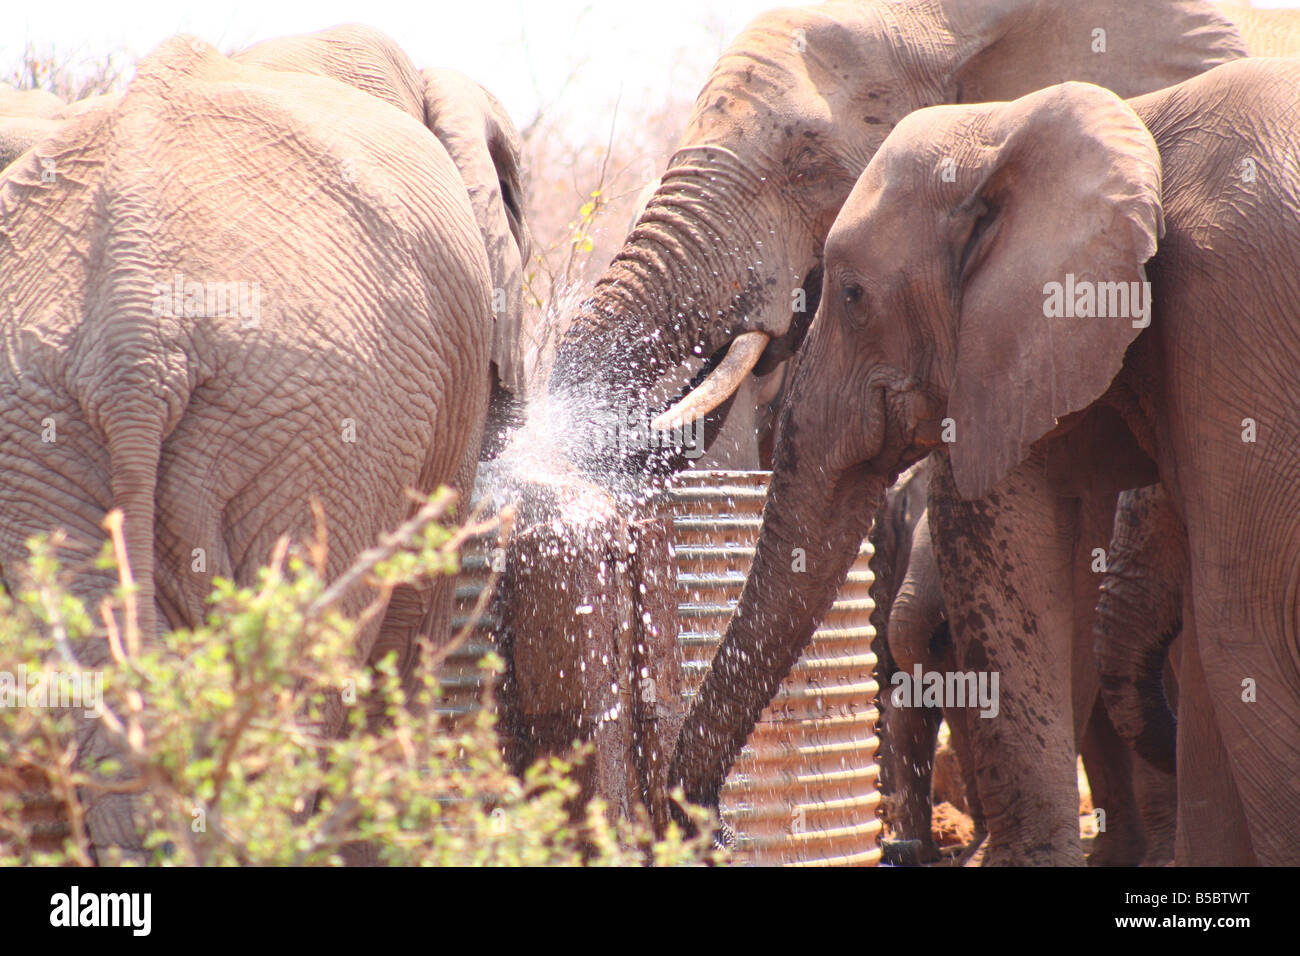 Elephants drinking from a water tank Stock Photo